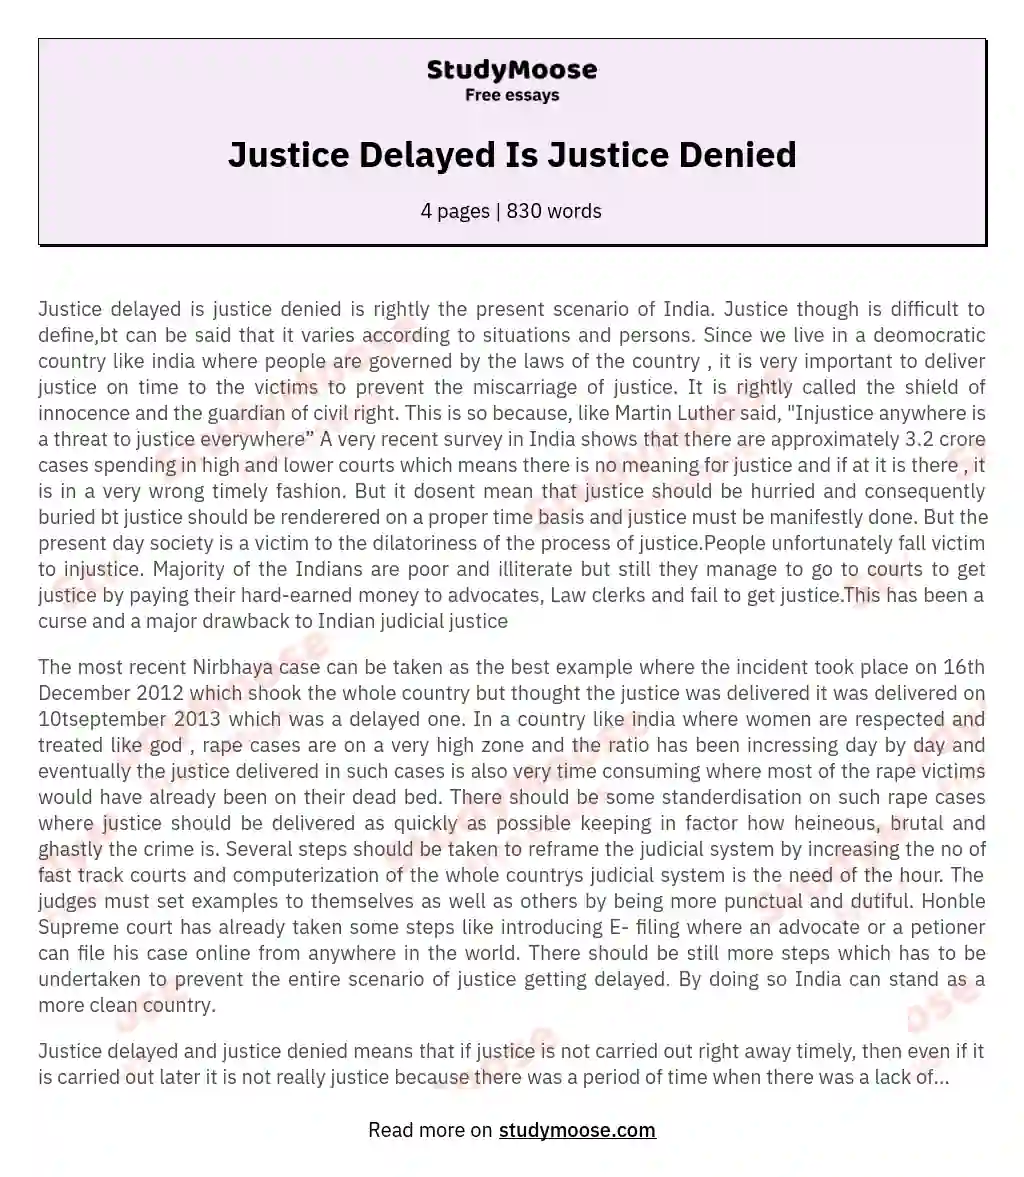 write an essay on justice delayed is justice denied